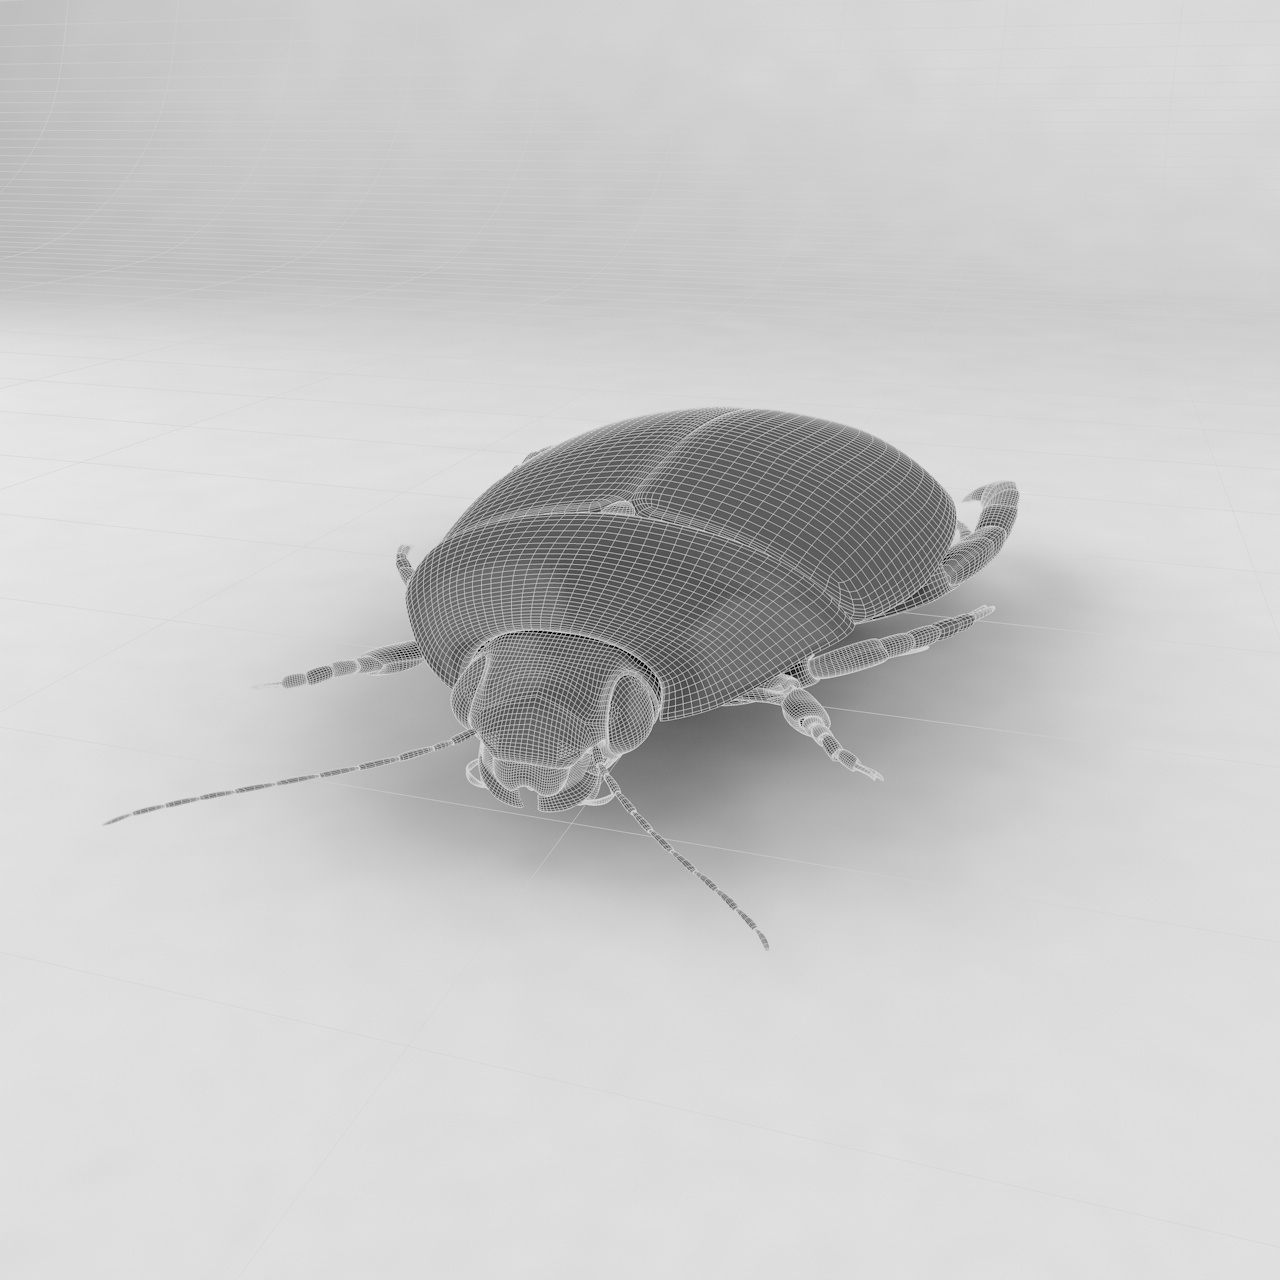 Cybister japonicus insect beetles 3d model